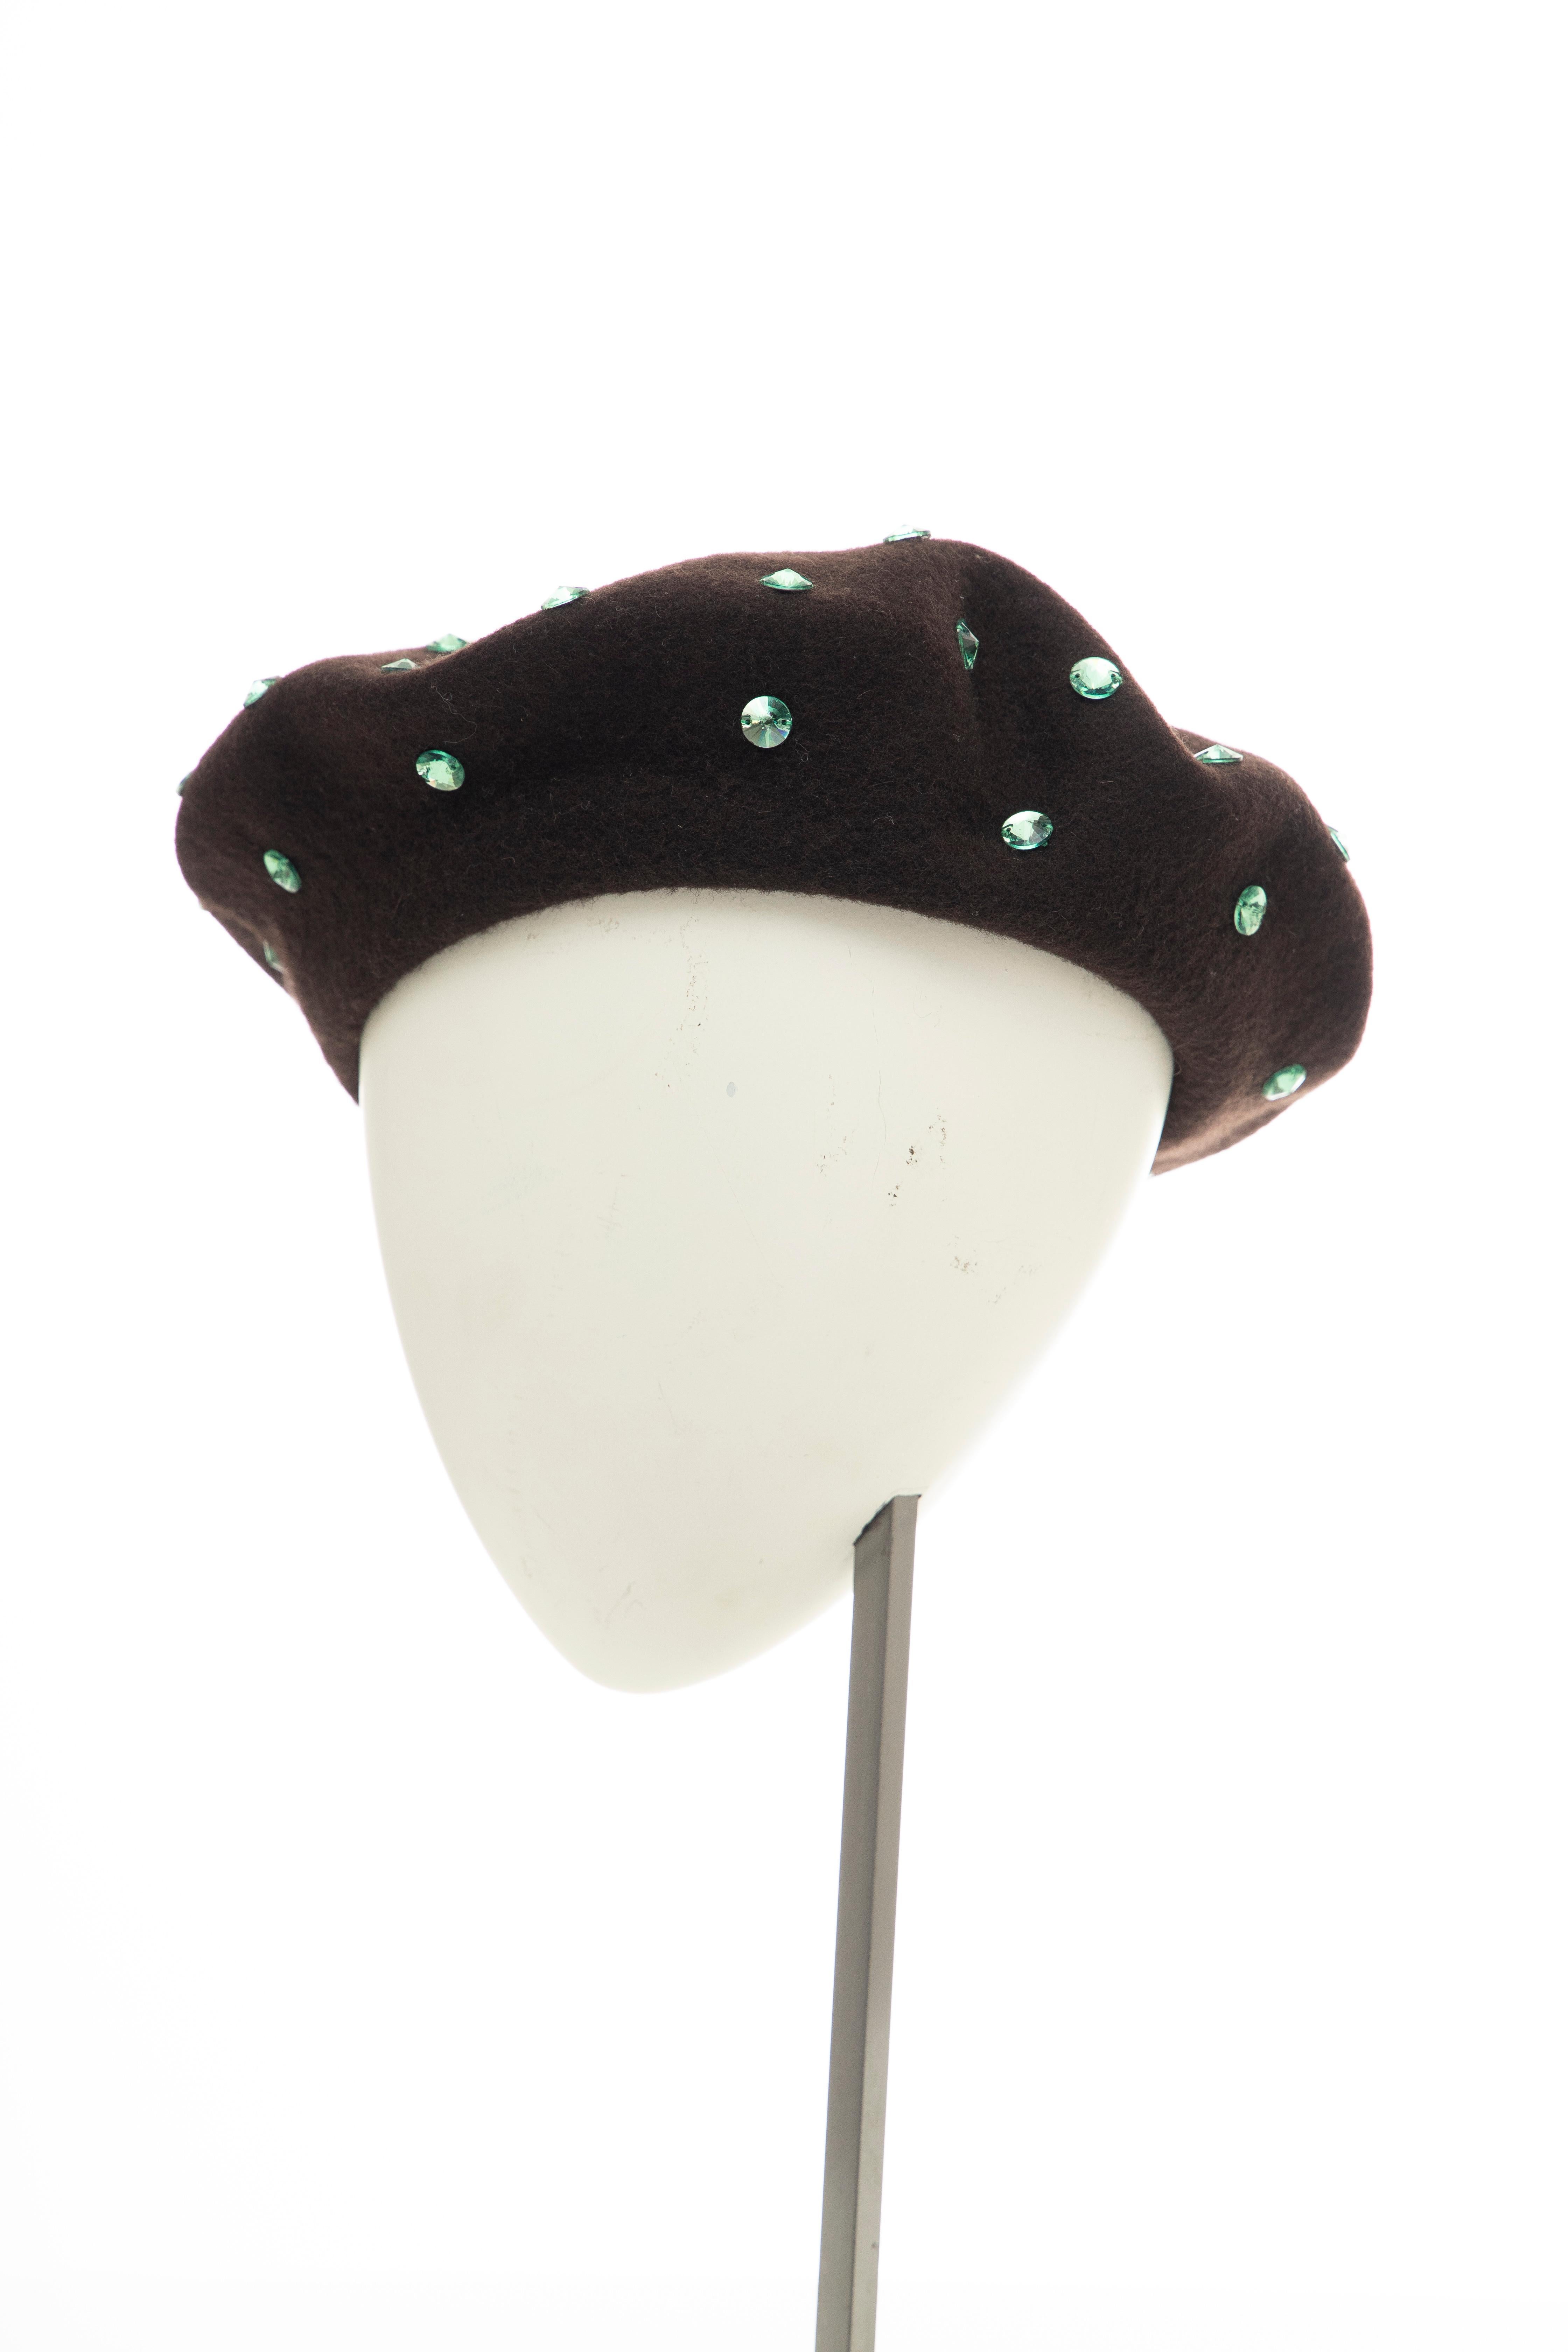 Dolce & Gabbana Wool Chocolate Brown Turquoise Cut Crystals Beret, Fall 2000 3